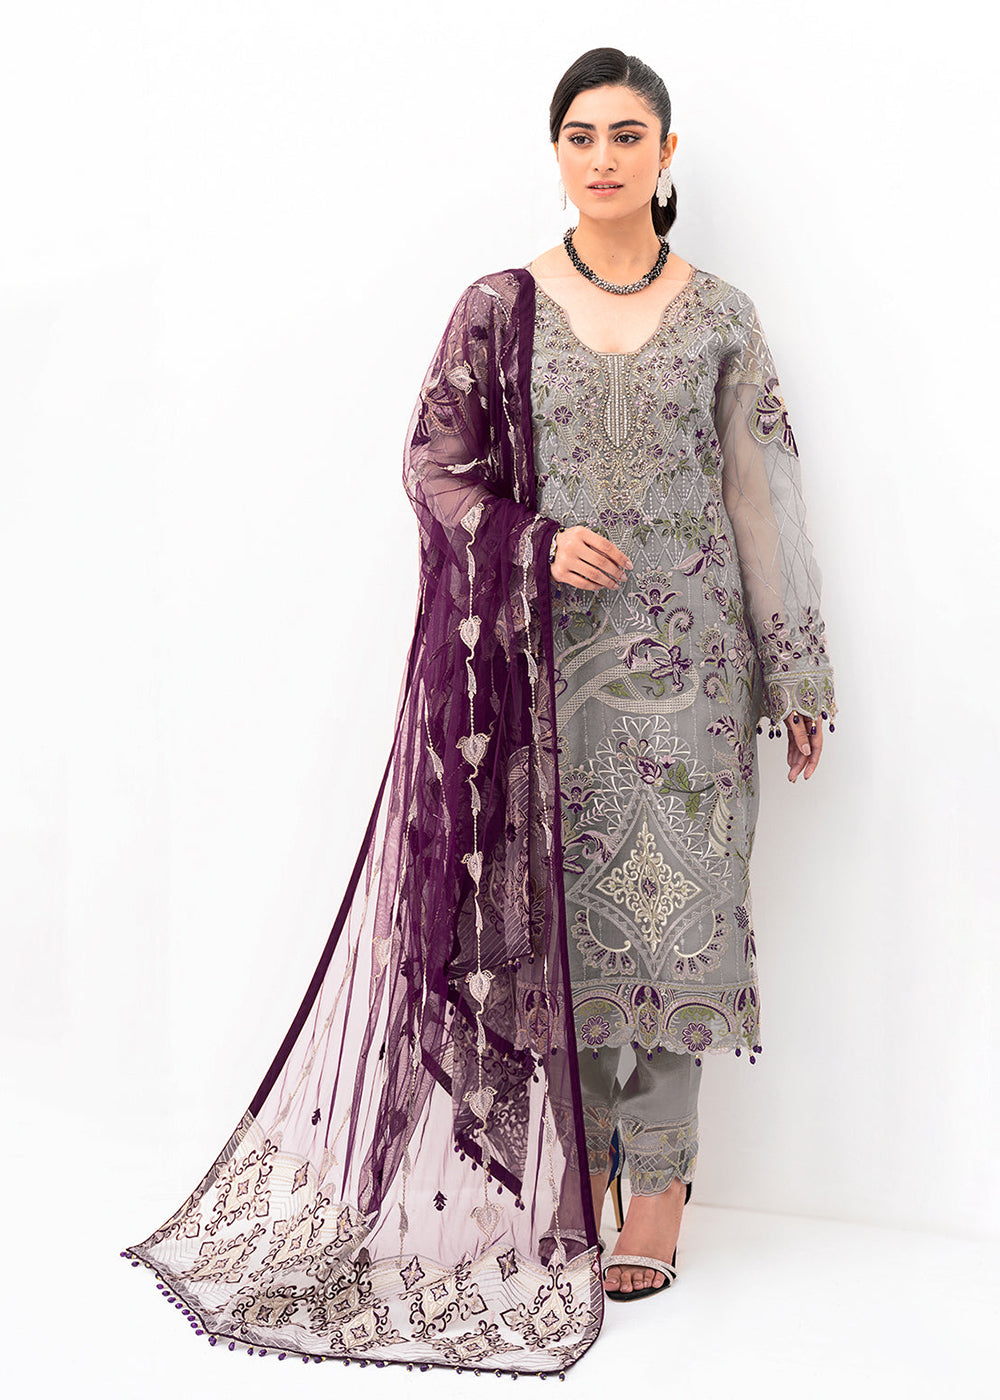 Buy Now Grey Organza Suit - Ramsha Minhal Collection Vol 8 - #M-801 Online in USA, UK, Canada & Worldwide at Empress Clothing. 